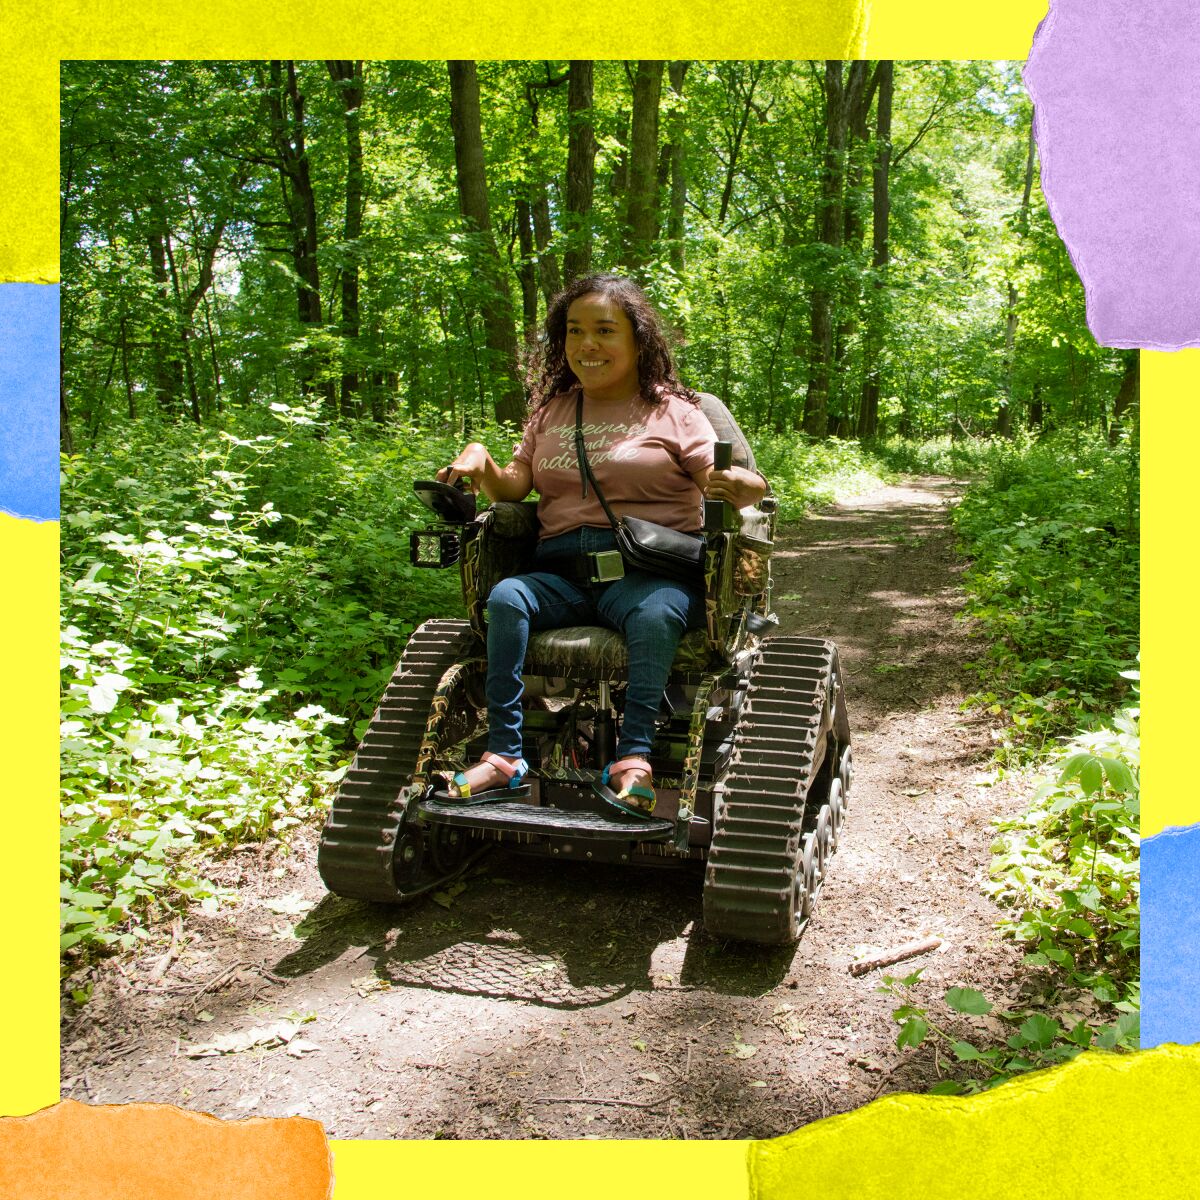 A human smiles while driving a small vehicle that has continuous tracks instead of wheels.